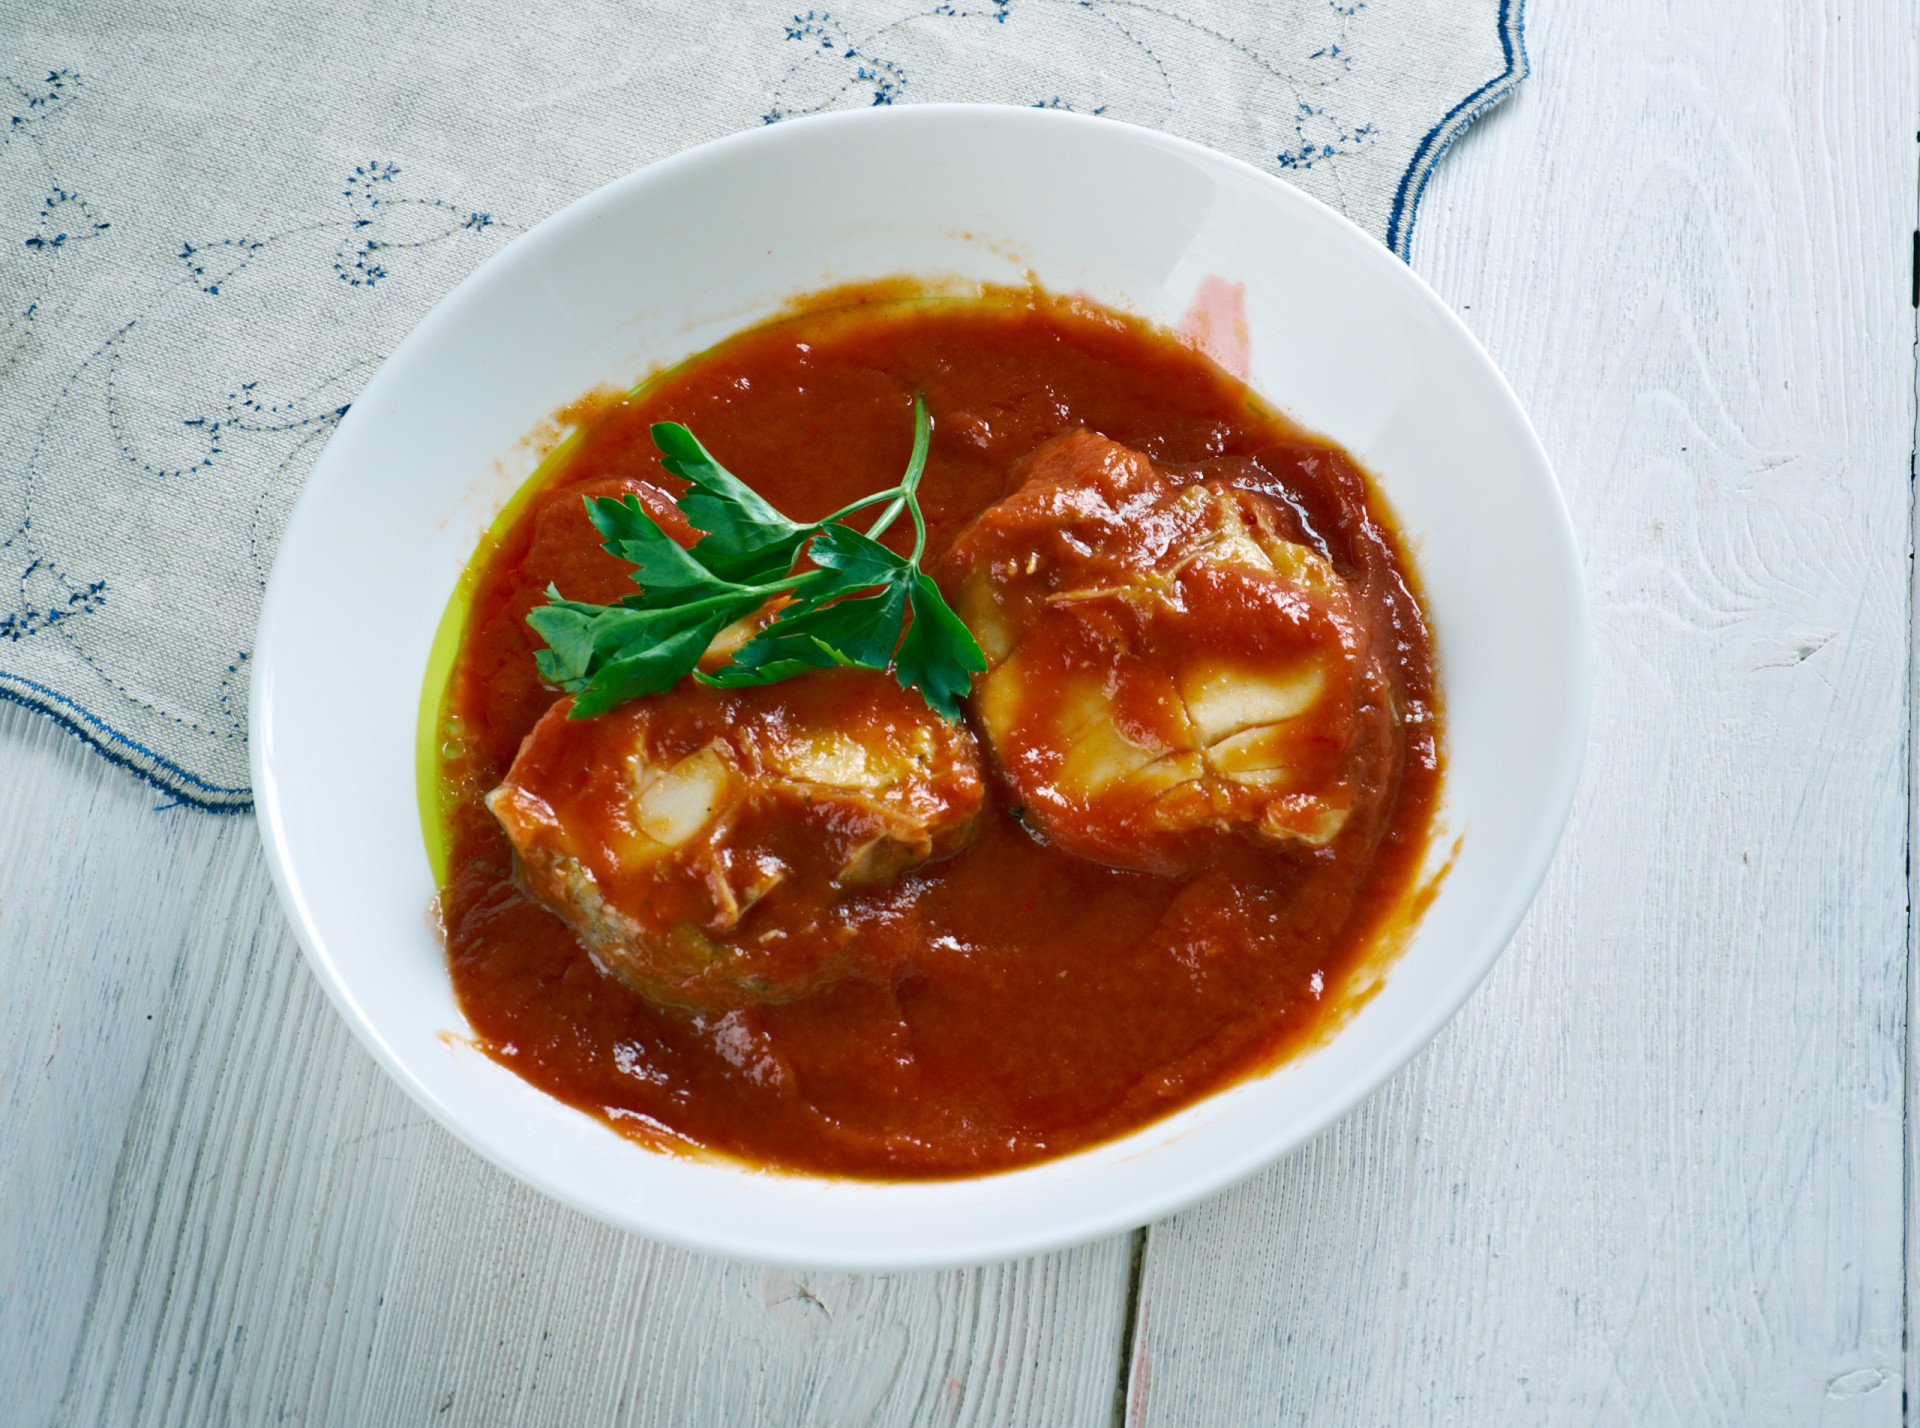 <p><span>Haraimi is a Libyan stew consisting of fish steaks in a rich, spicy tomato sauce. Some recipes add potatoes, though this is optional. Serve with a side of bread.</span></p><p><a href="https://www.msn.com/en-us/community/channel/vid-7xx8mnucu55yw63we9va2gwr7uihbxwc68fxqp25x6tg4ftibpra?cvid=94631541bc0f4f89bfd59158d696ad7e">Follow us and access great exclusive content every day</a></p>